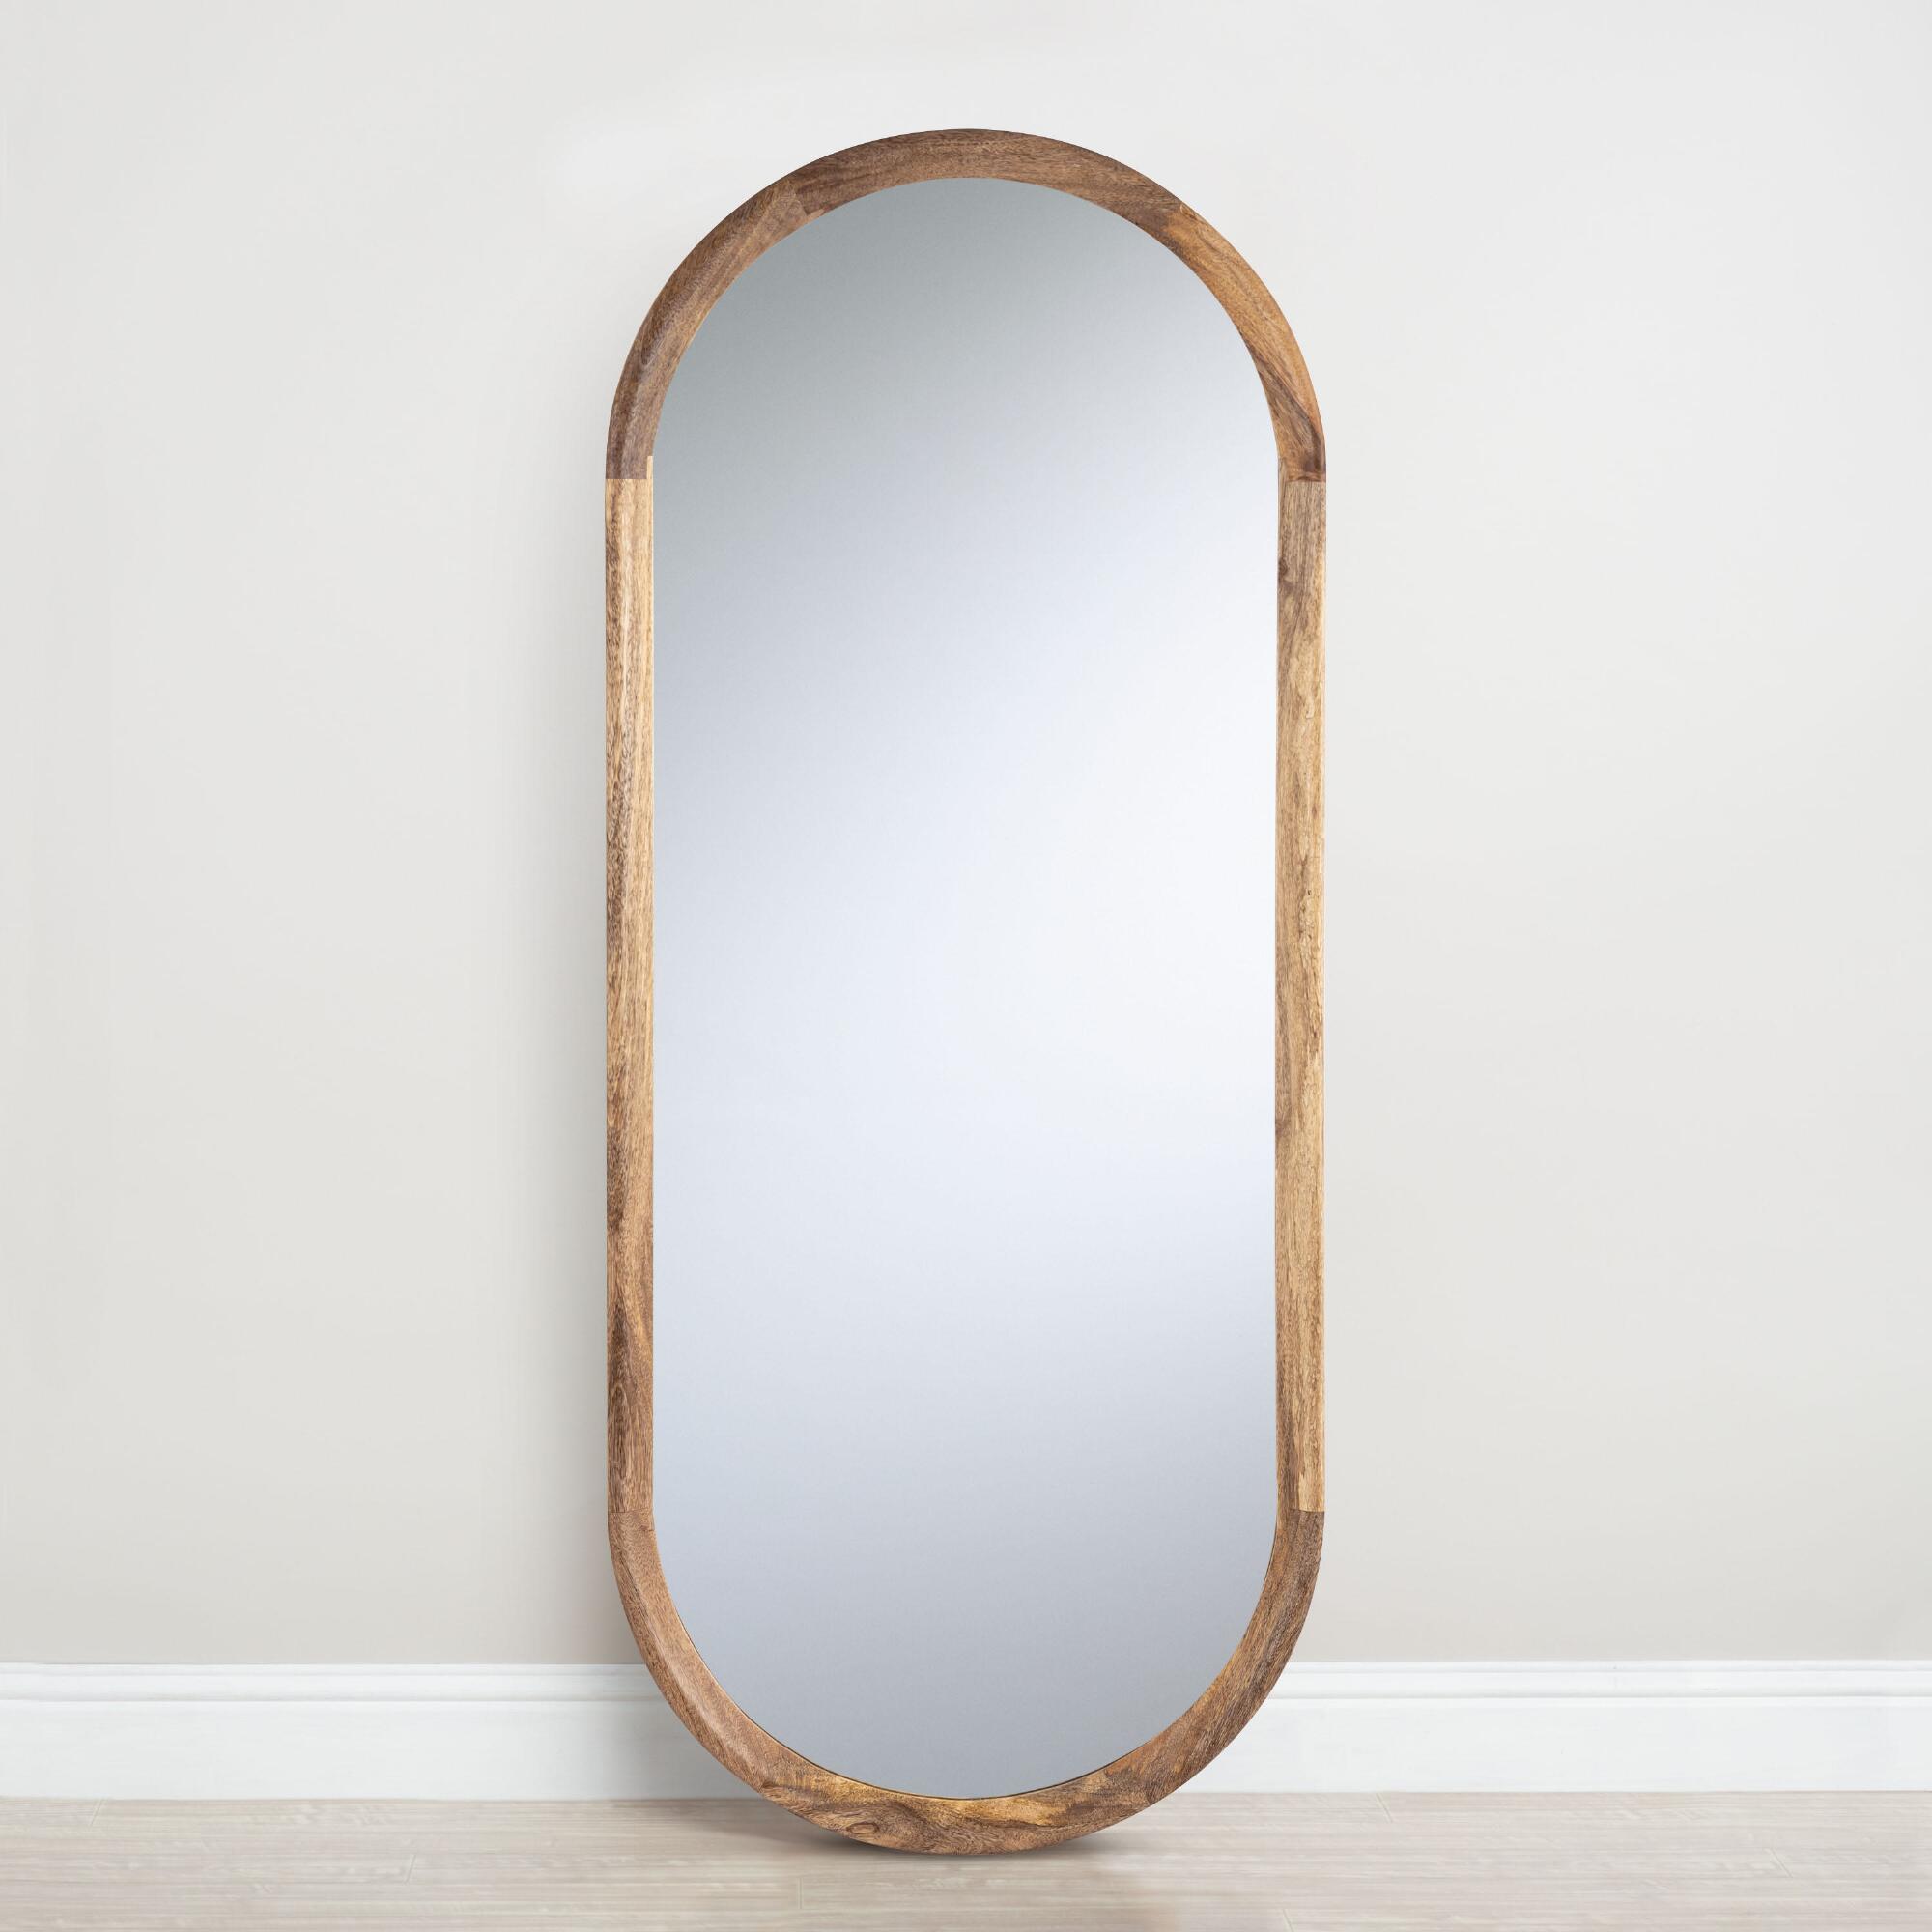 Oblong Natural Wood Full Length Mirror by World Market